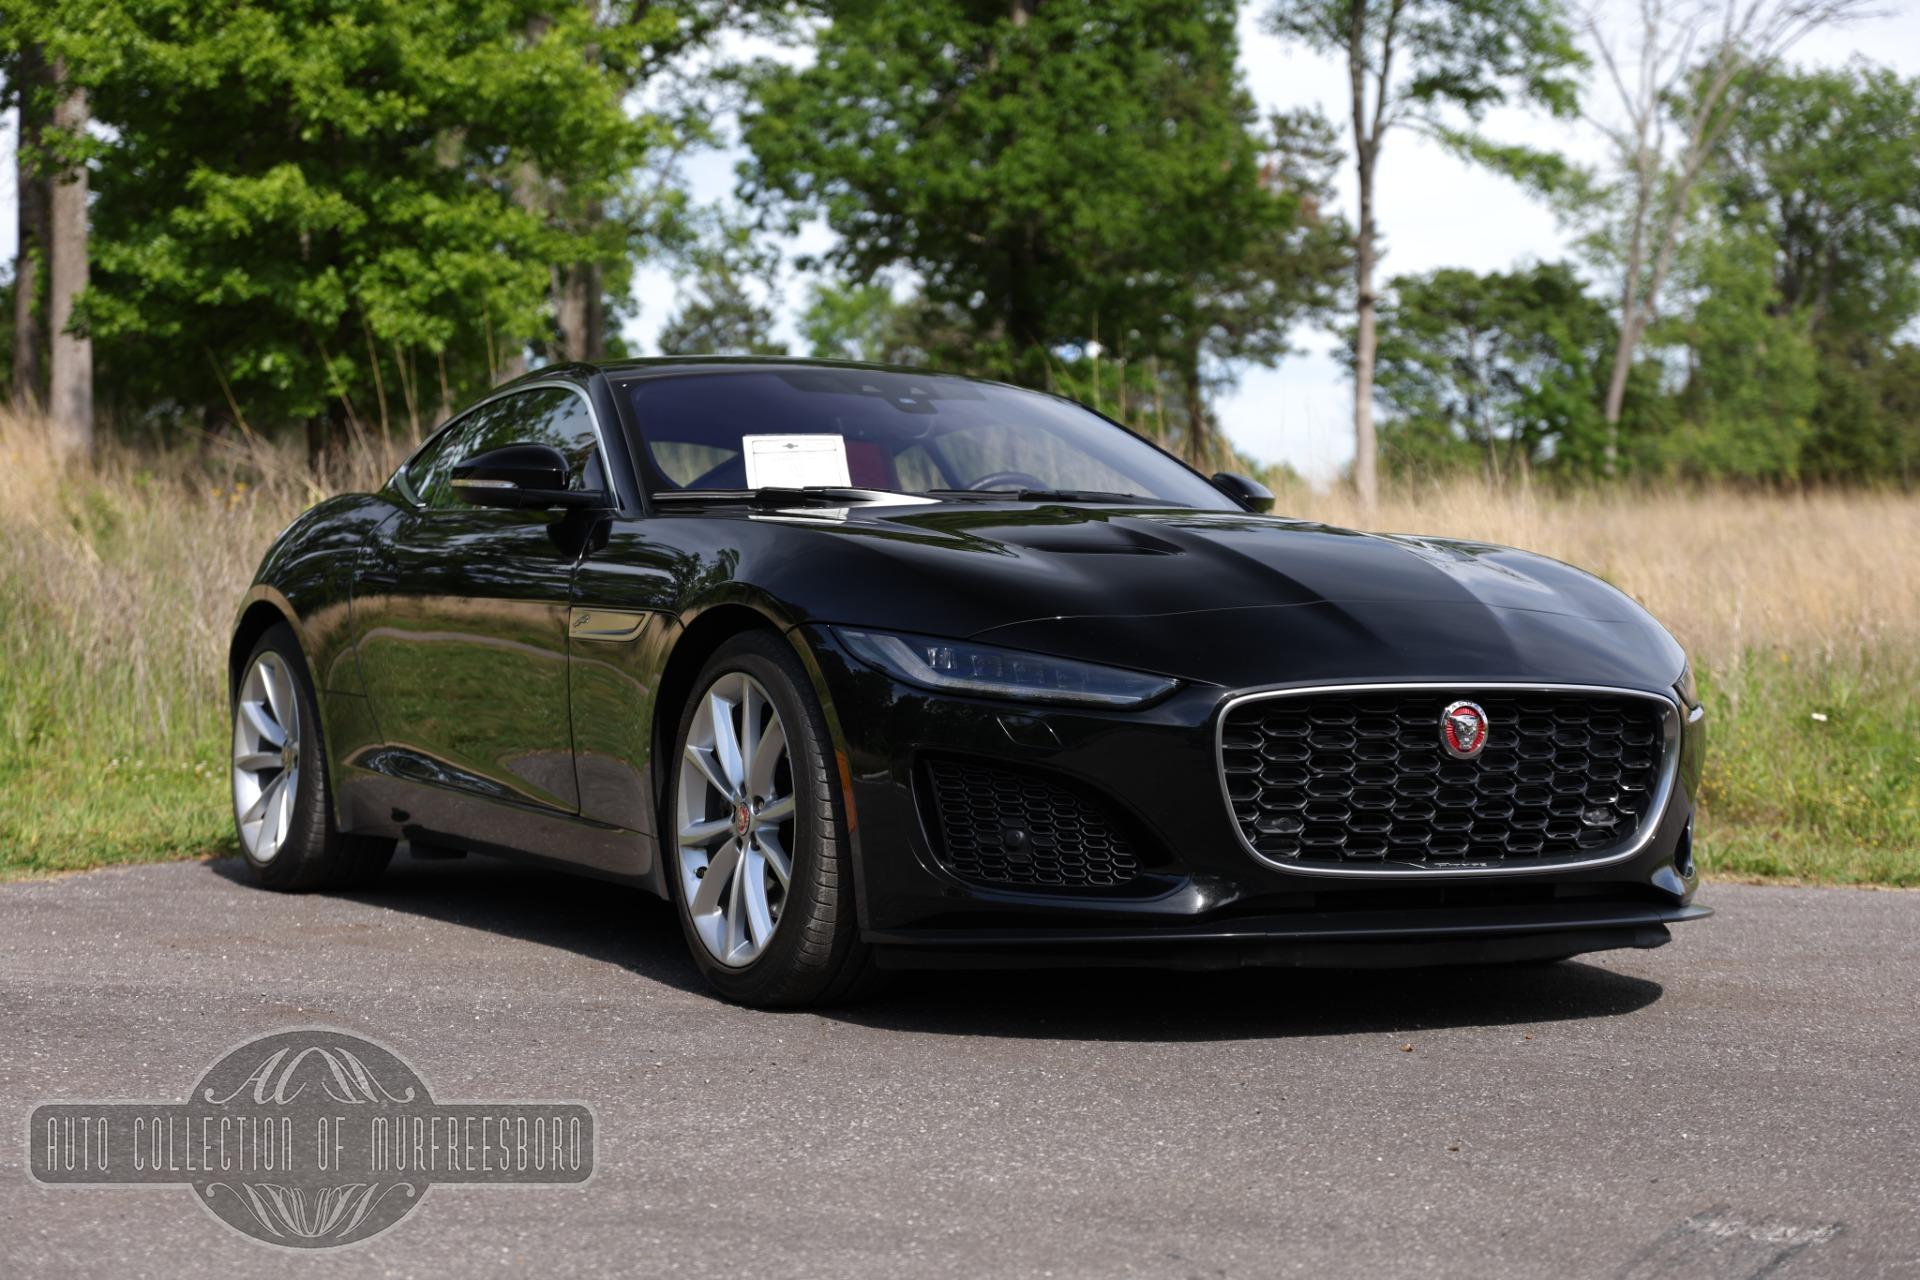 Used 2021 Jaguar F-TYPE P300 INTERIOR LUXUARY PACK W/BLIND SPOT ASSIST for sale $56,750 at Auto Collection in Murfreesboro TN 37129 1